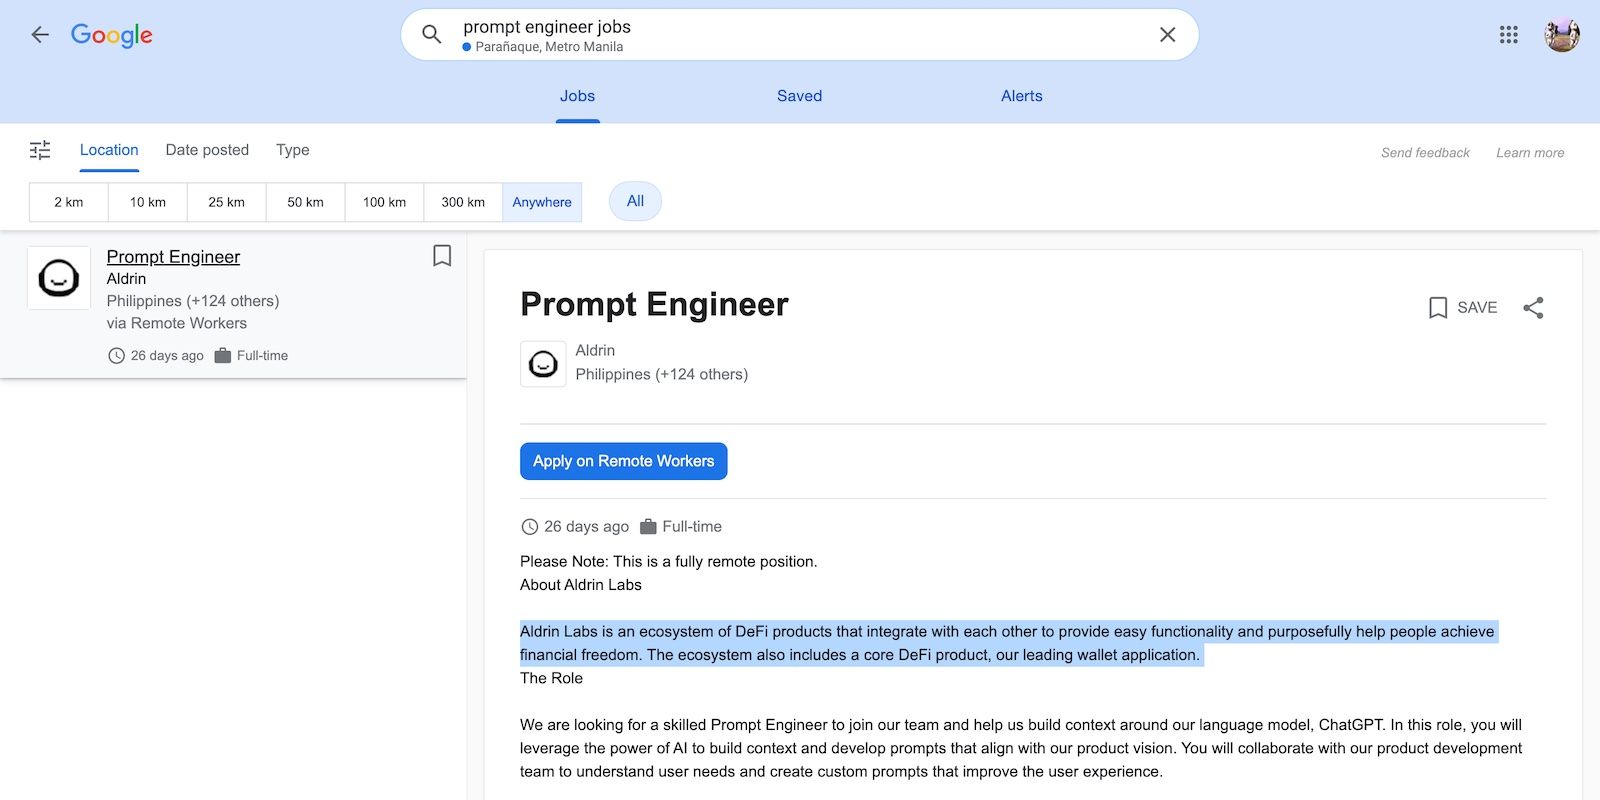 Searching for Prompt Engineer Jobs on Google